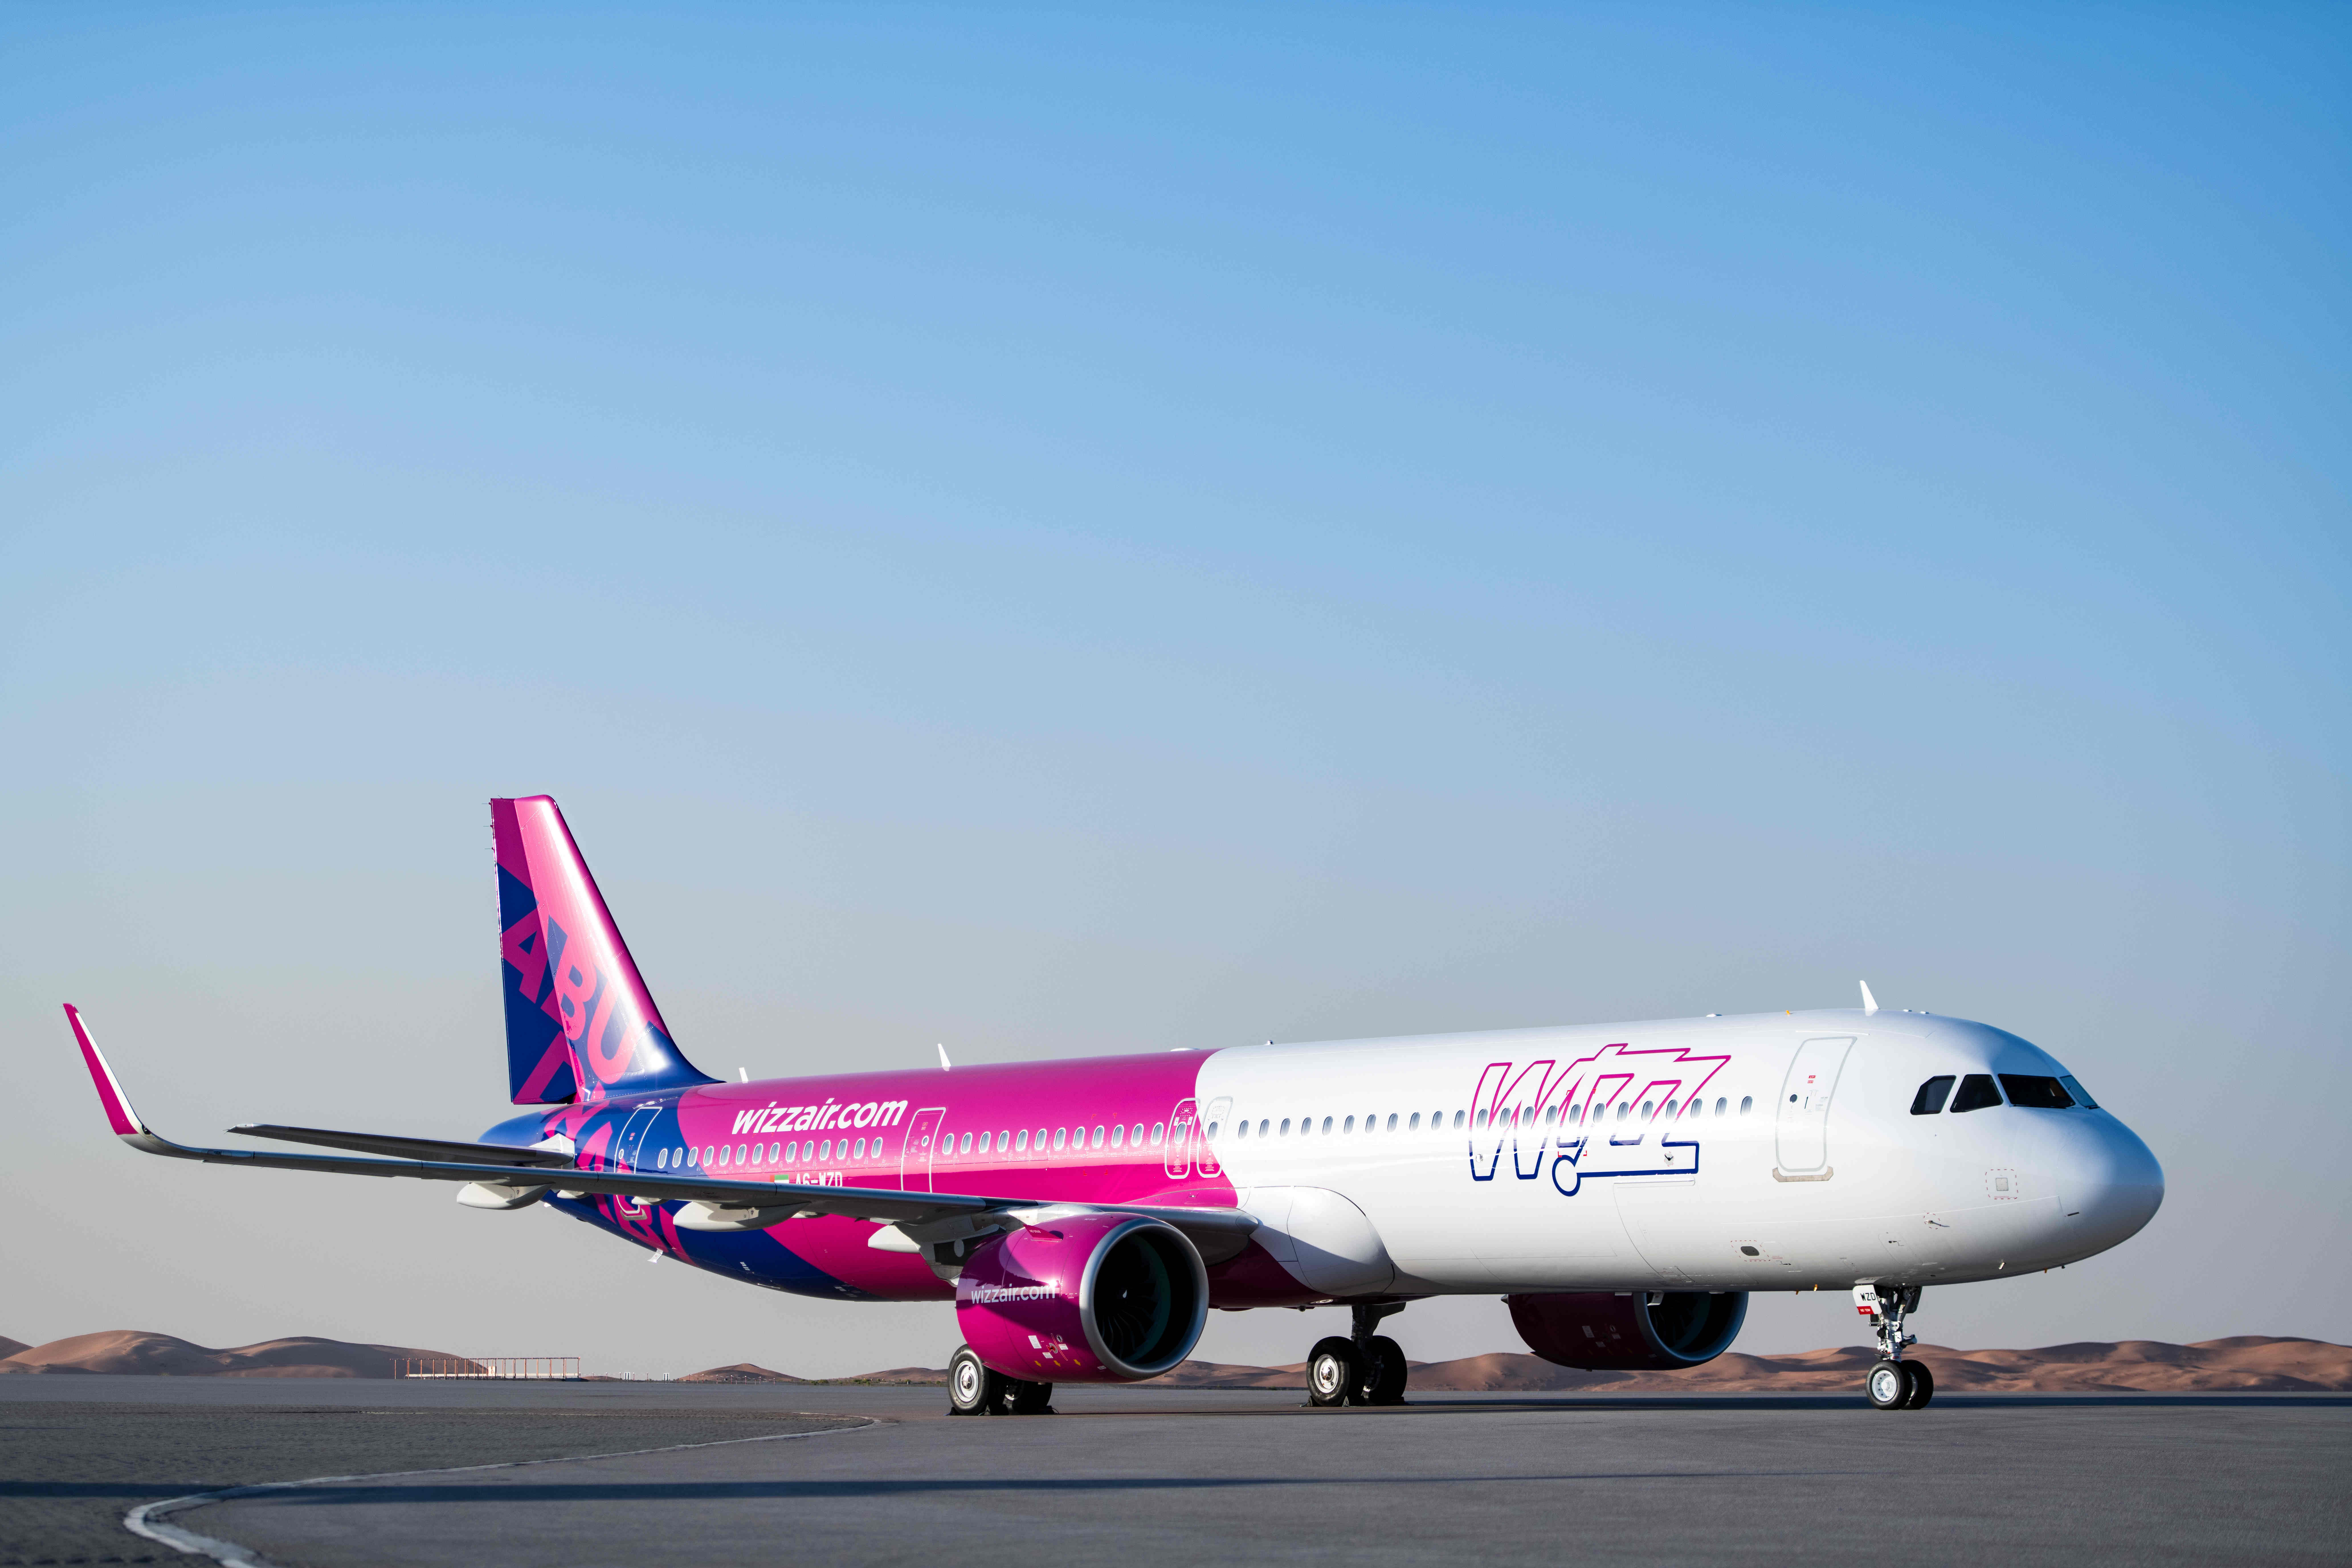 Wizz Air Abu Dhabi Offers Impossible Low Fares To Its GCC Destinations For AED 29